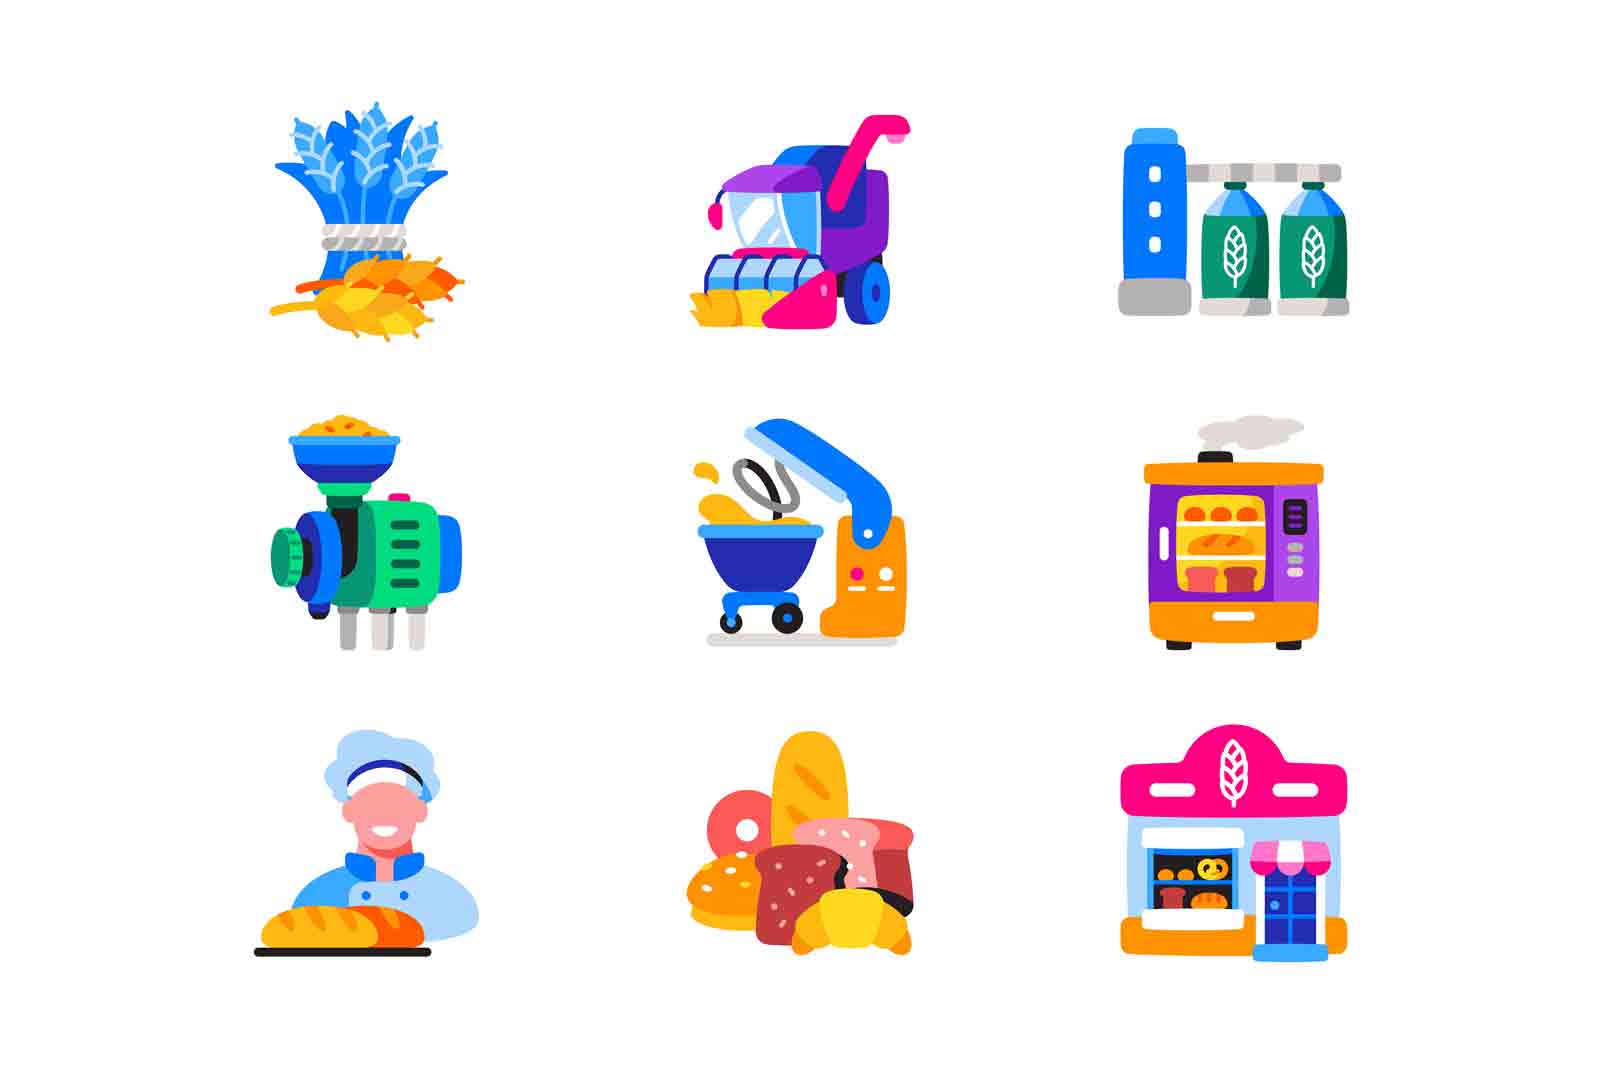 Bread and wheat vector icons set. Cultivation, production and use of bread and wheat concept.